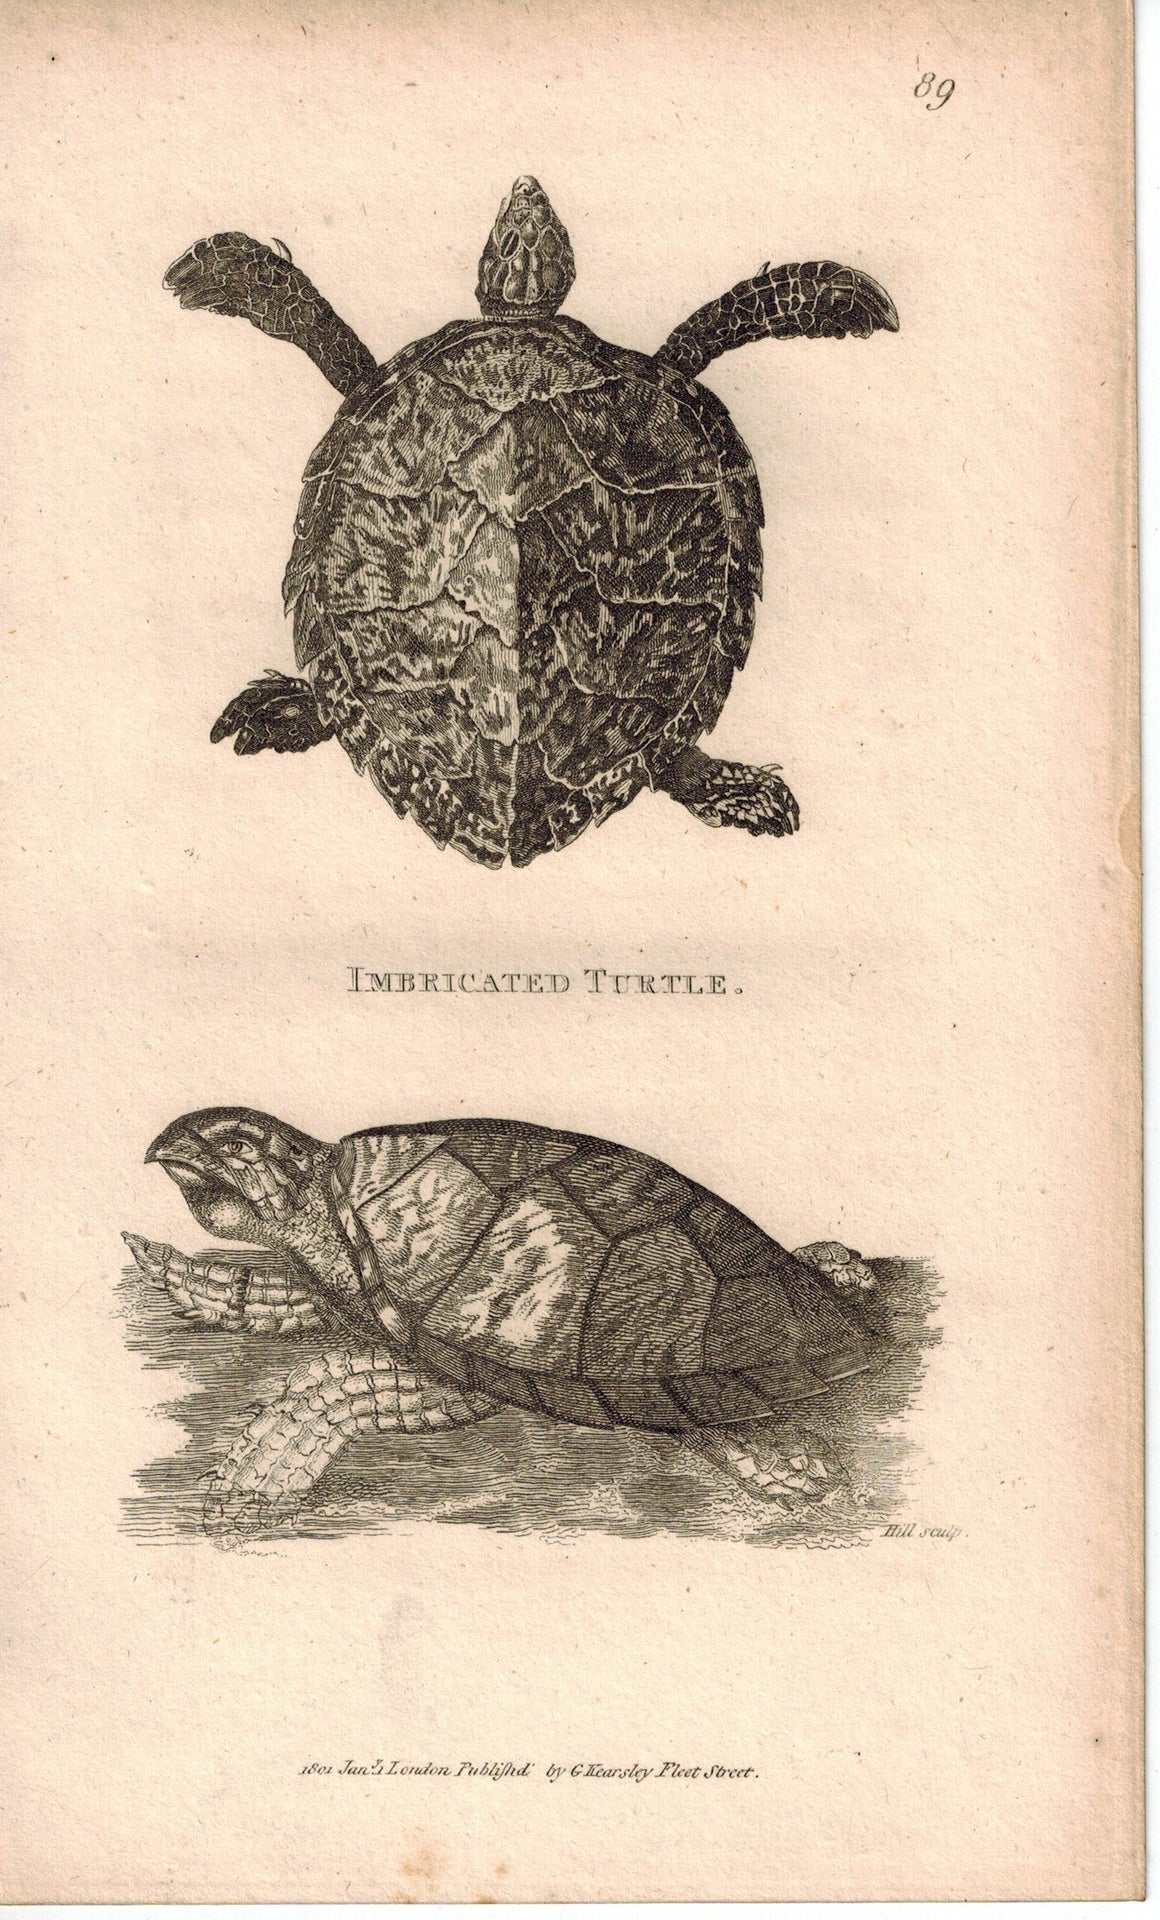 Imbricated Turtle 1809 Original Antique Engraving Print by Shaw & Griffith